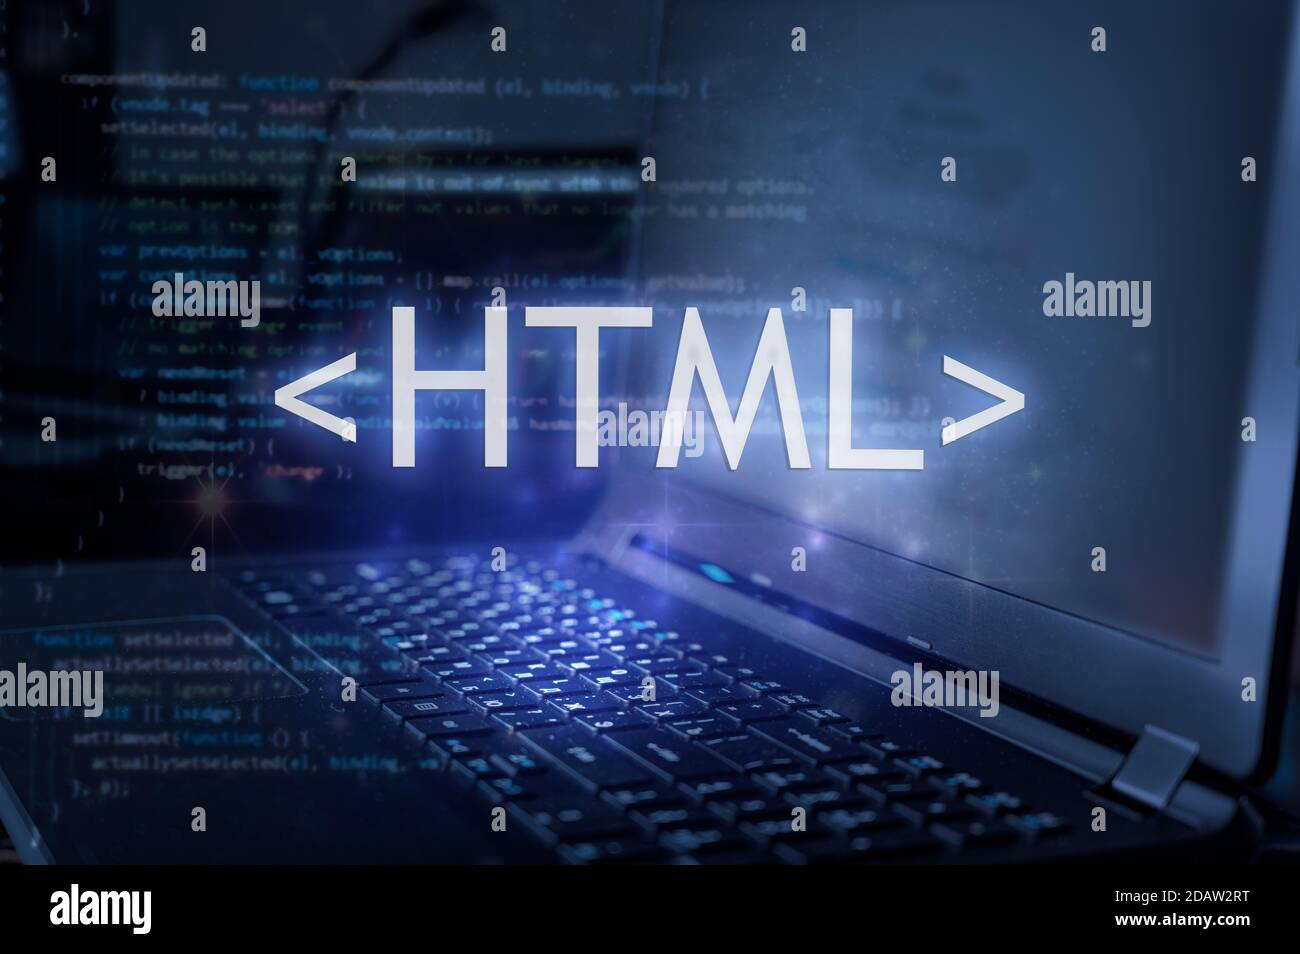 HTML inscription against laptop and code background. Learn html programming language, computer courses, training. Stock Photo